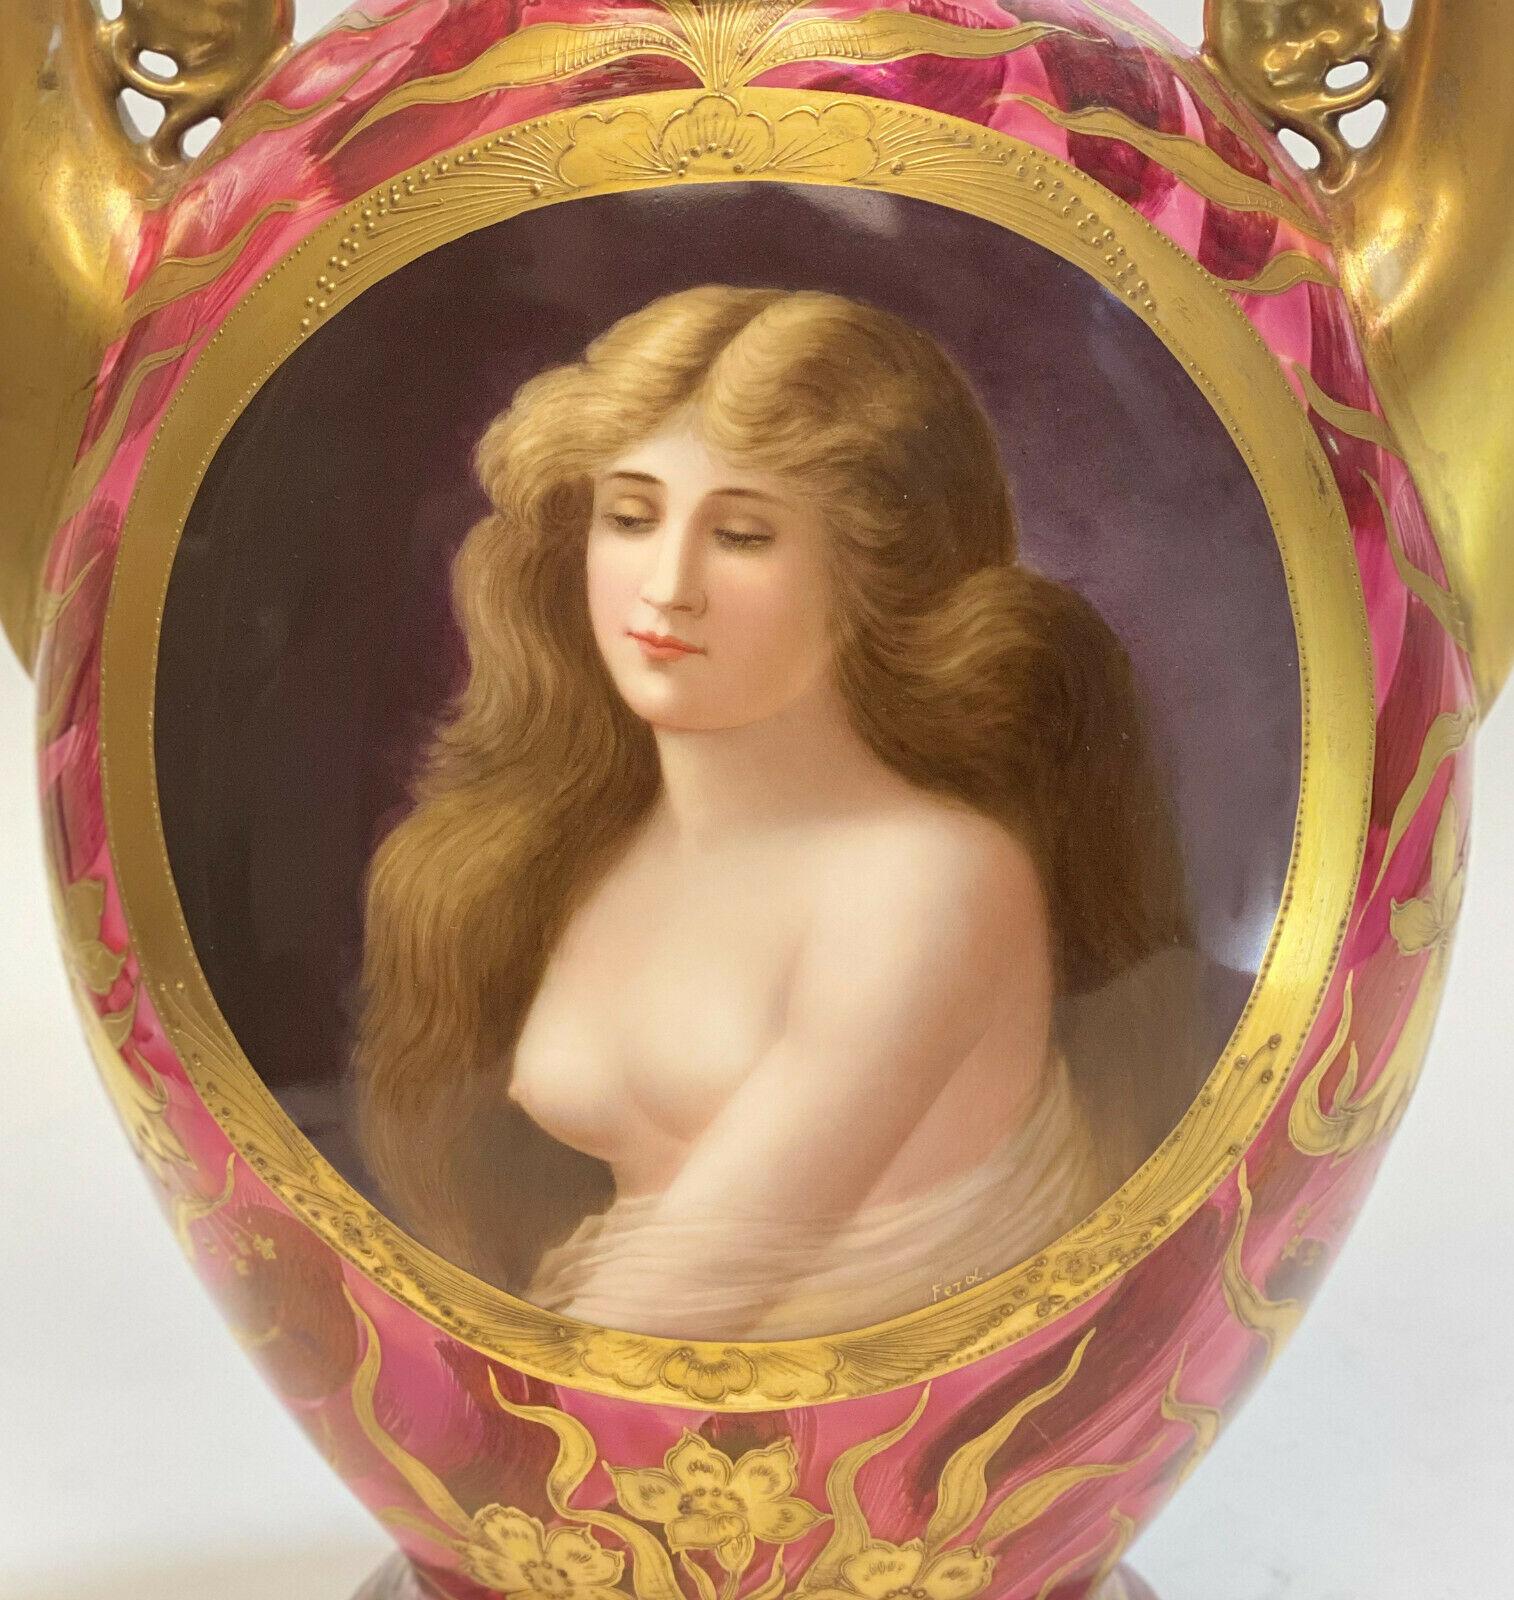 oyal Vienna Art Nouveau hand painted porcelain twin handled lidded urn, circa 1910. A pink and red ground with gold encrusted leaves and floral accents throughout. The center of the urn depicts a partially nude beauty. Artist-signed Ferd. Royal